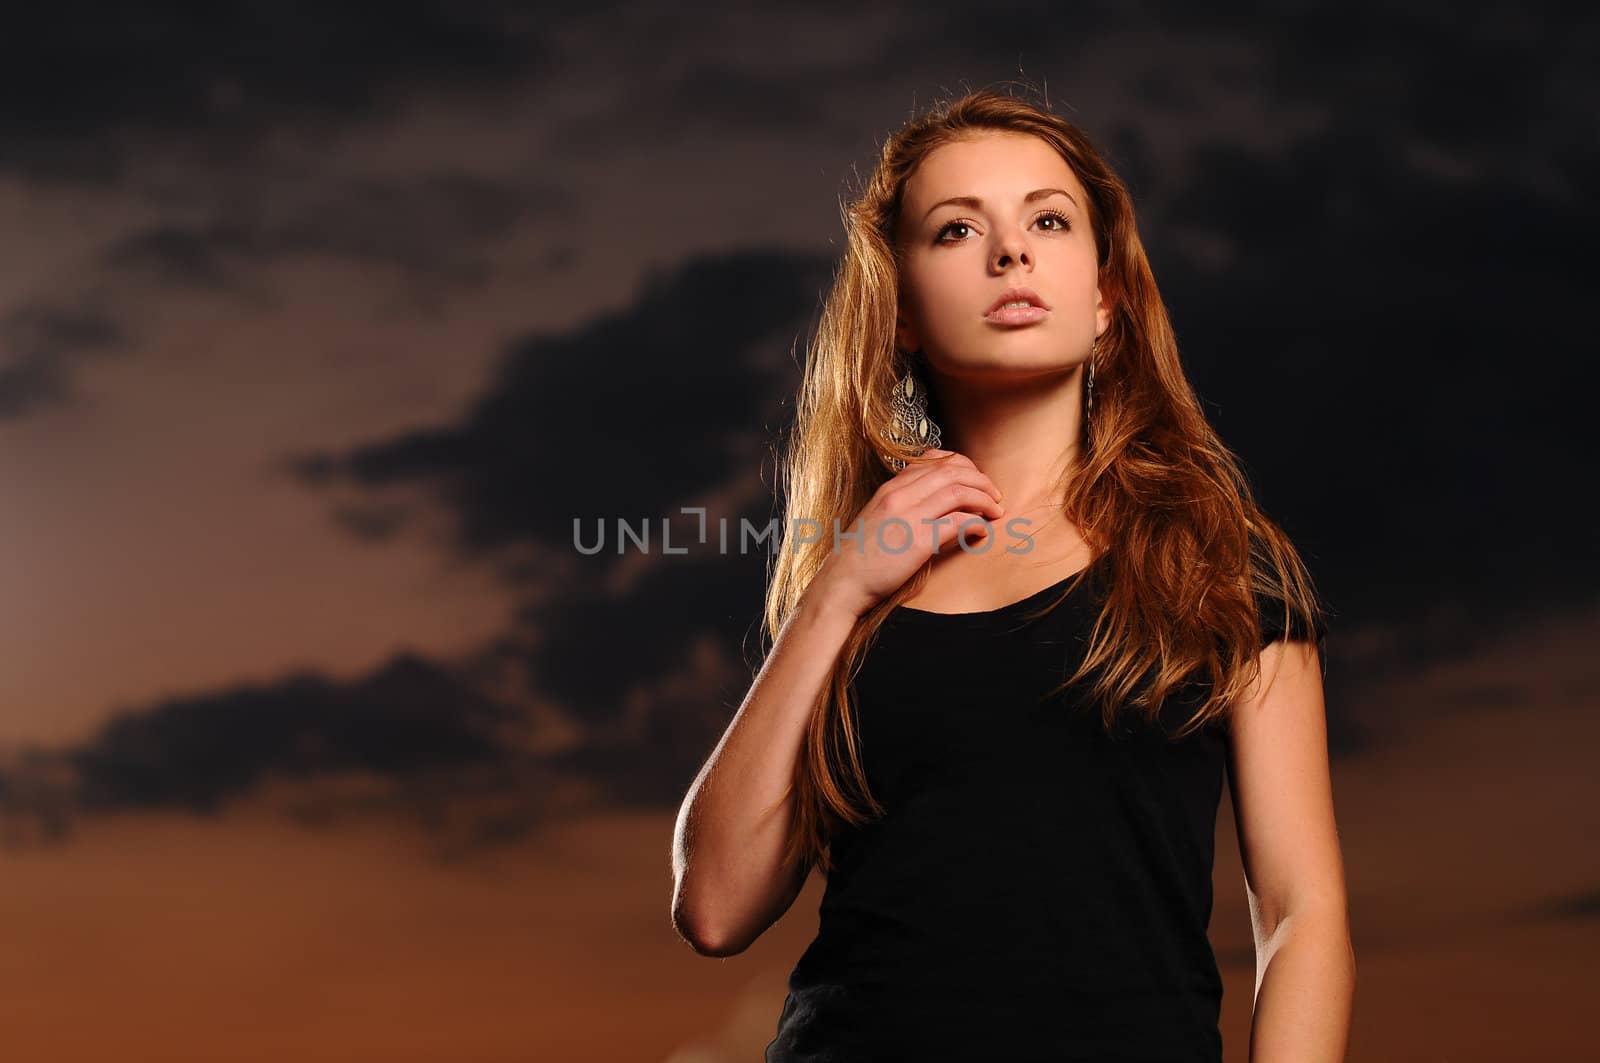 Portrait of a young attractive woman in a black shirt at dusk by gravityimaging1